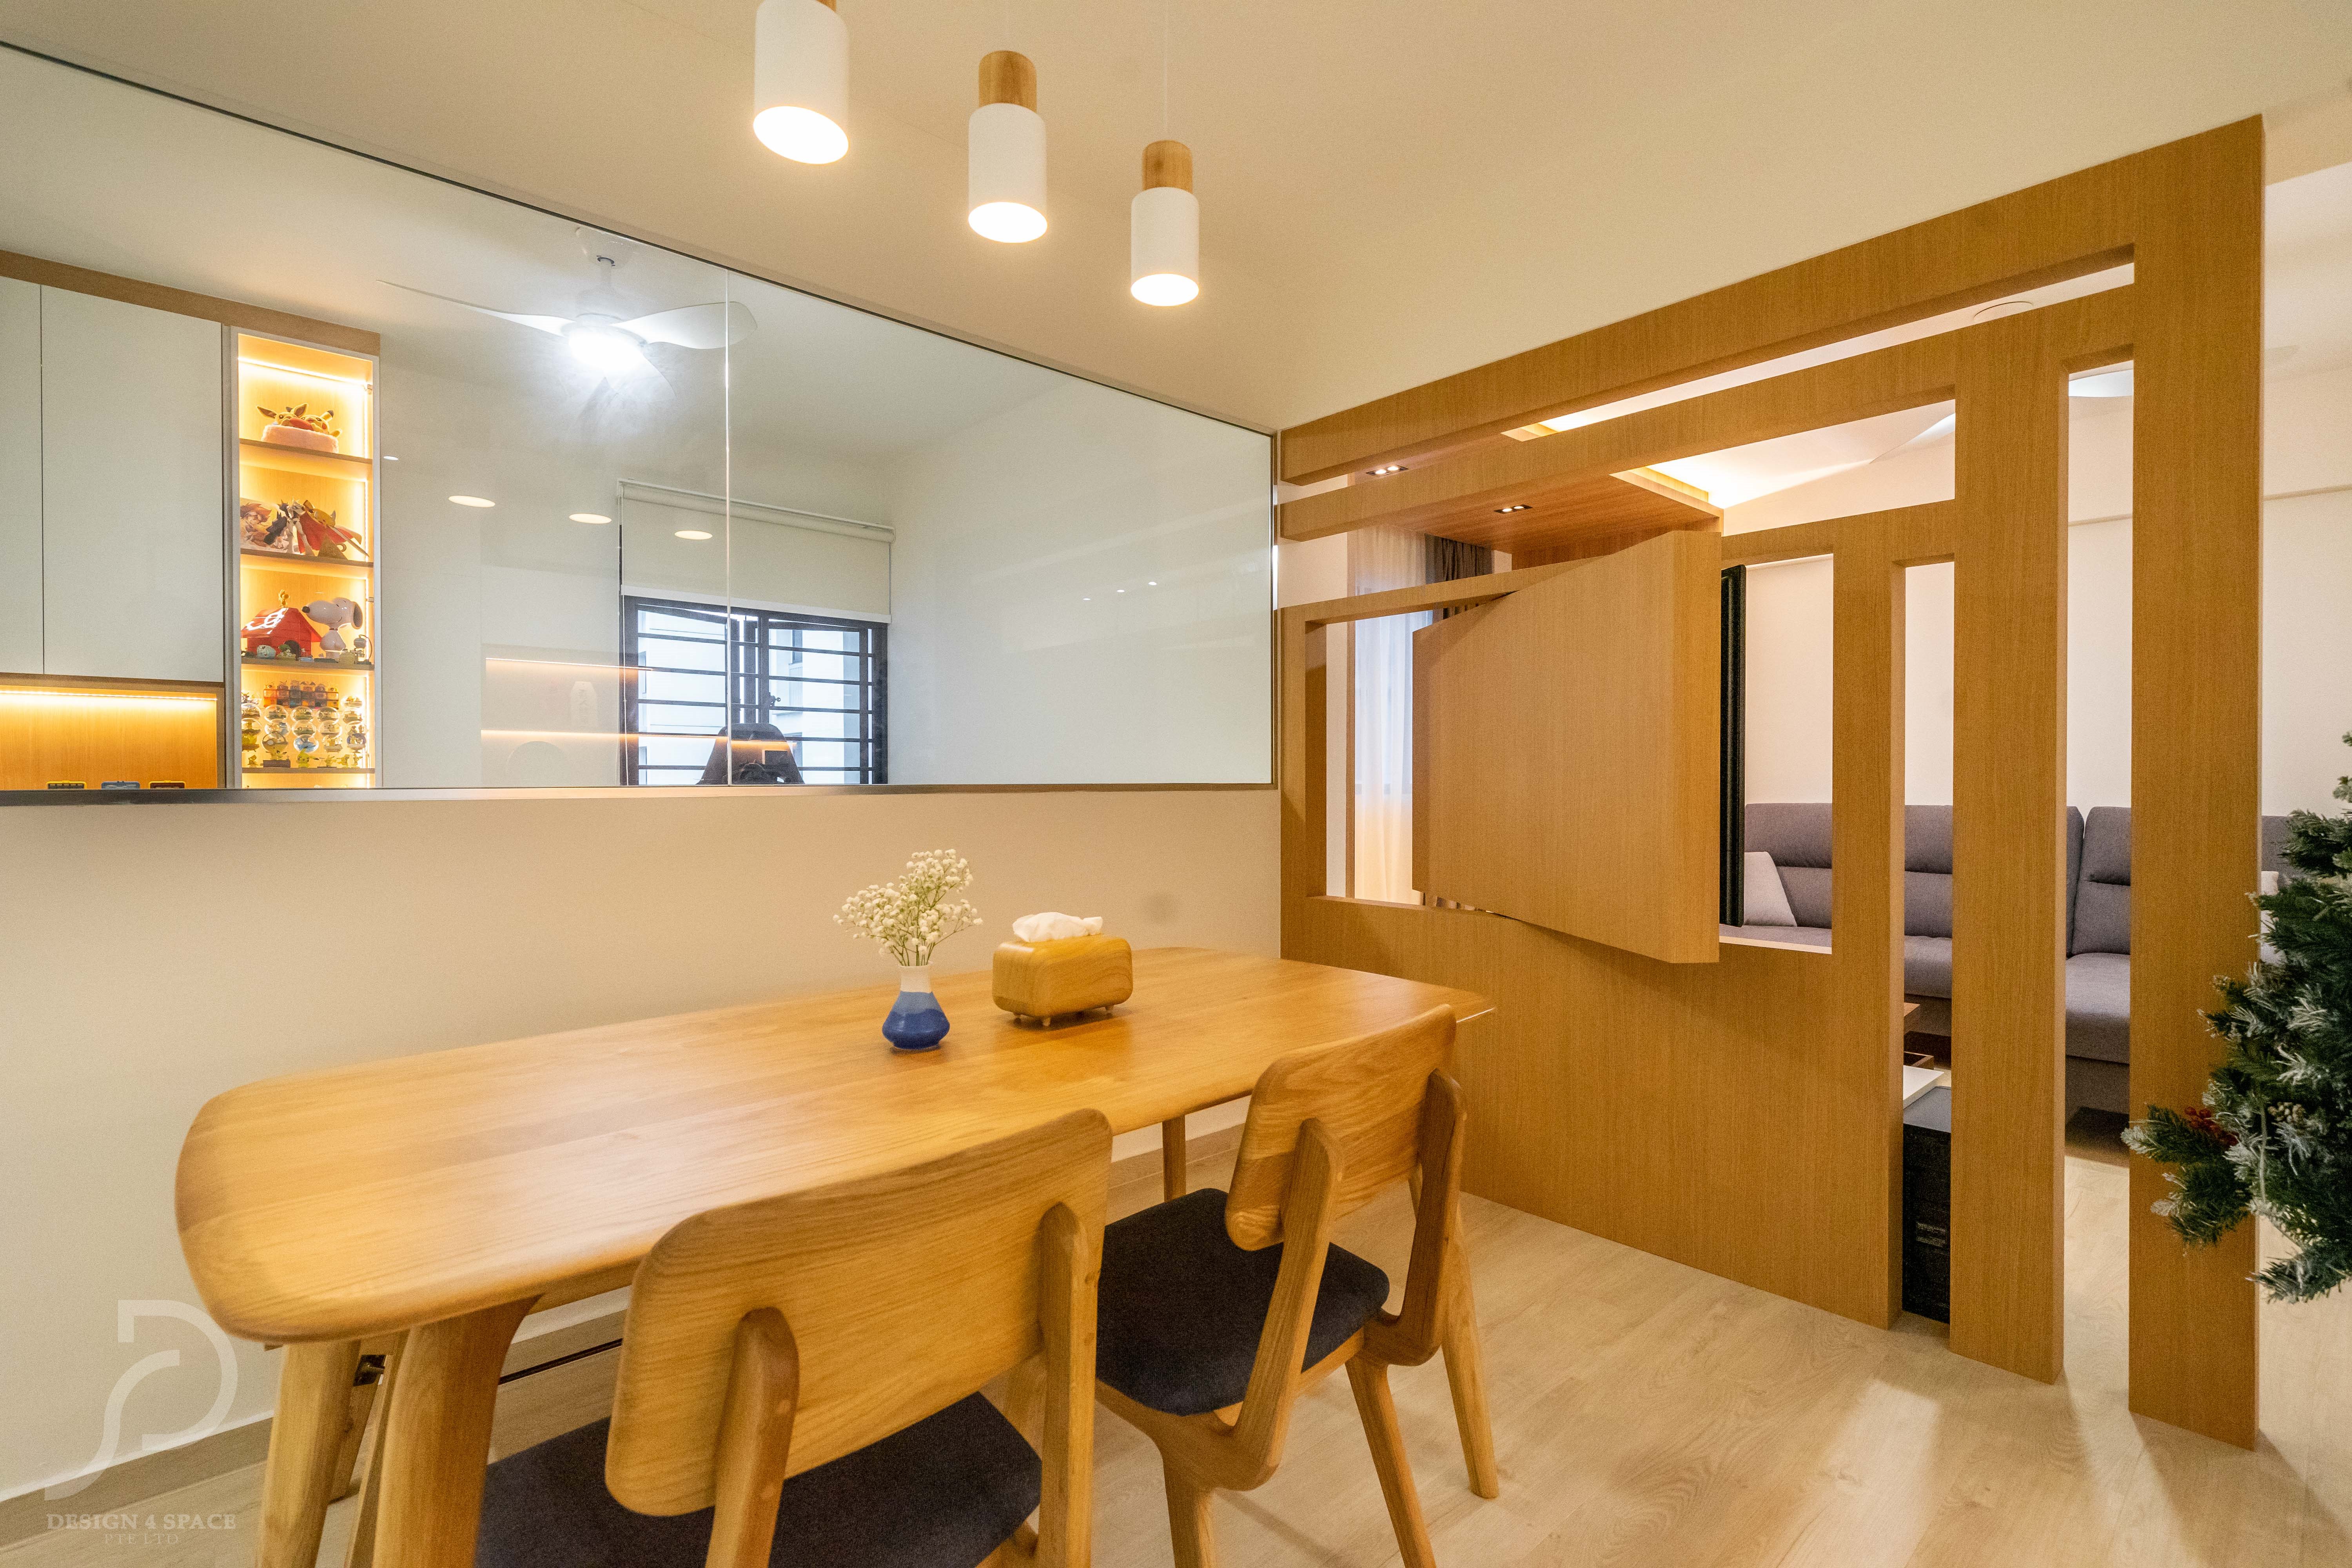 Contemporary, Modern, Others Design - Dining Room - HDB 5 Room - Design by Design 4 Space Pte Ltd